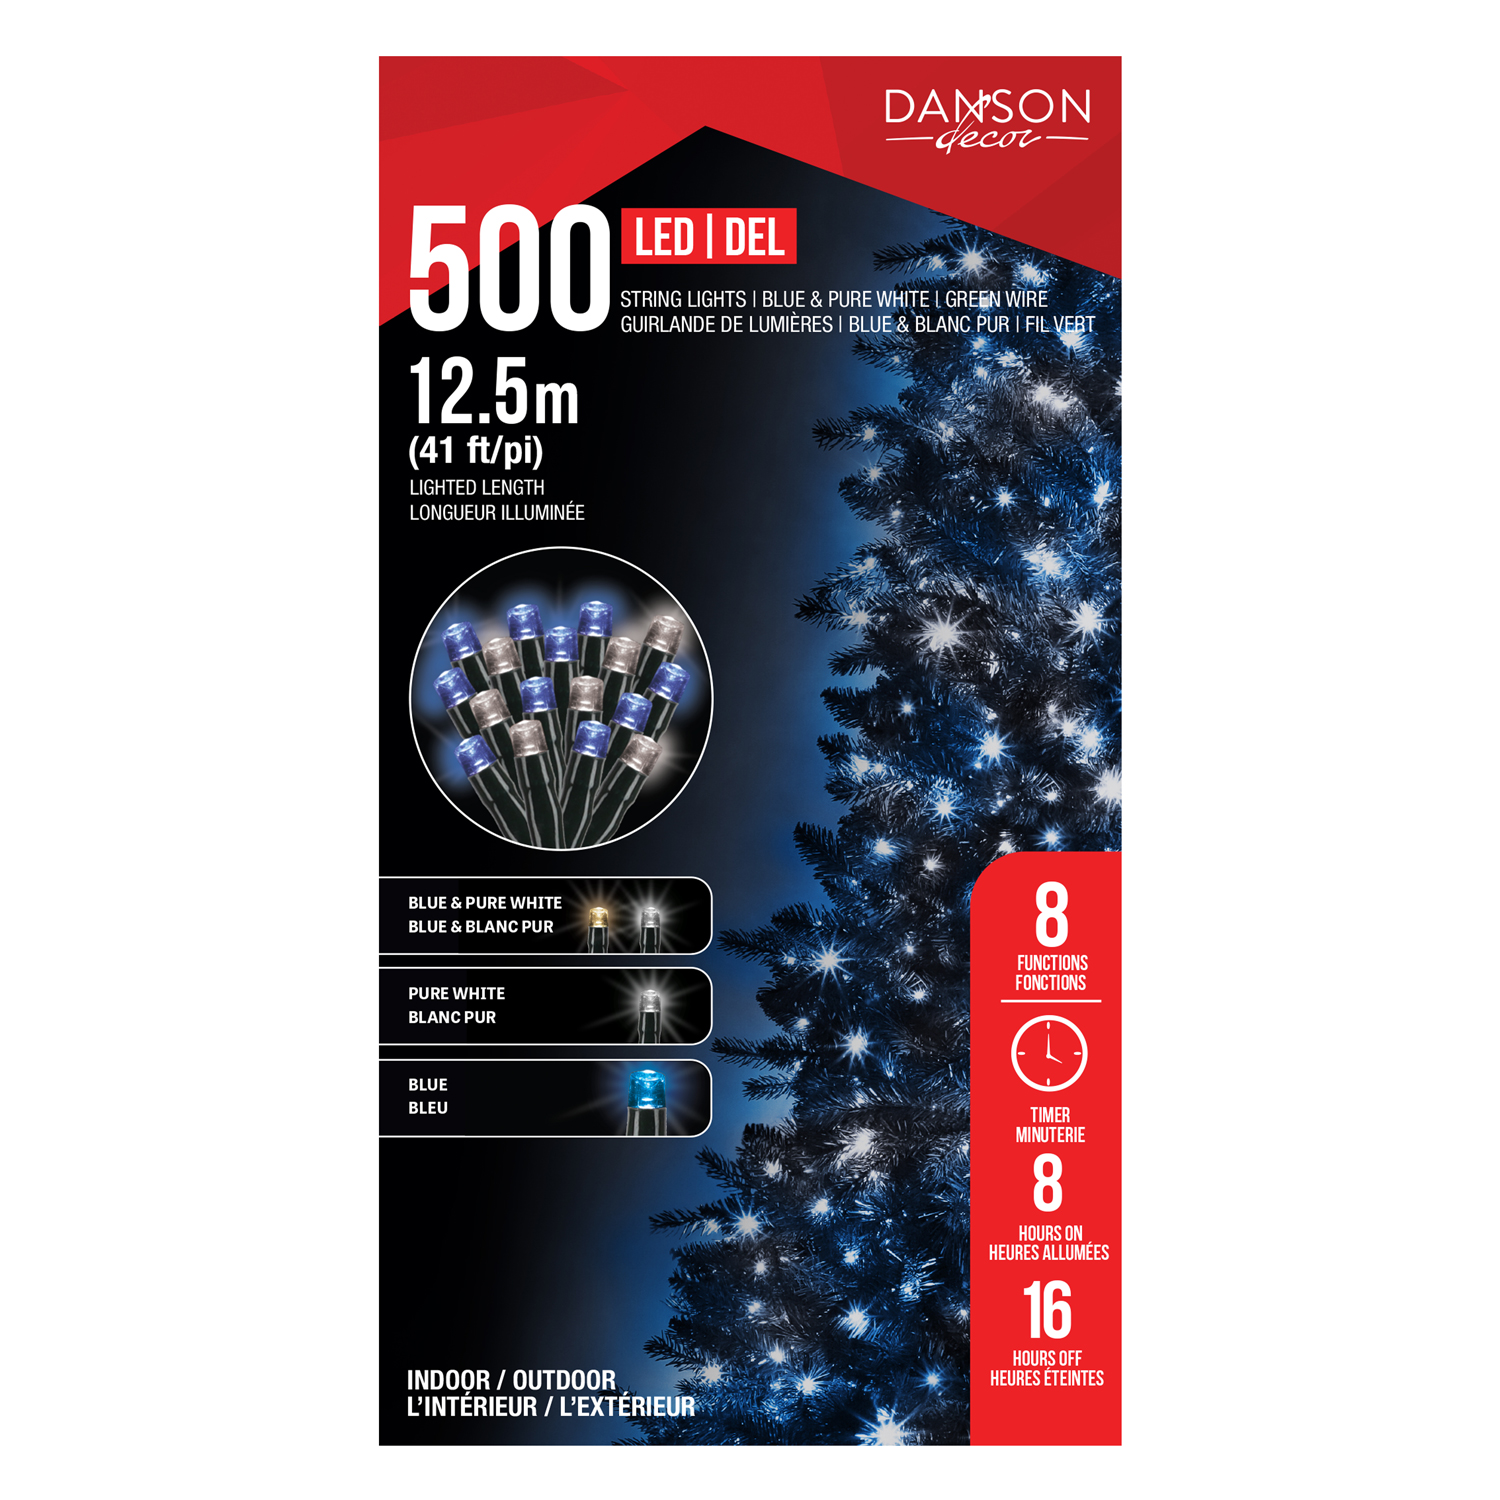 Danson - Christmas light set, 500 LED, blue and   pure white, indoor/outdoor use